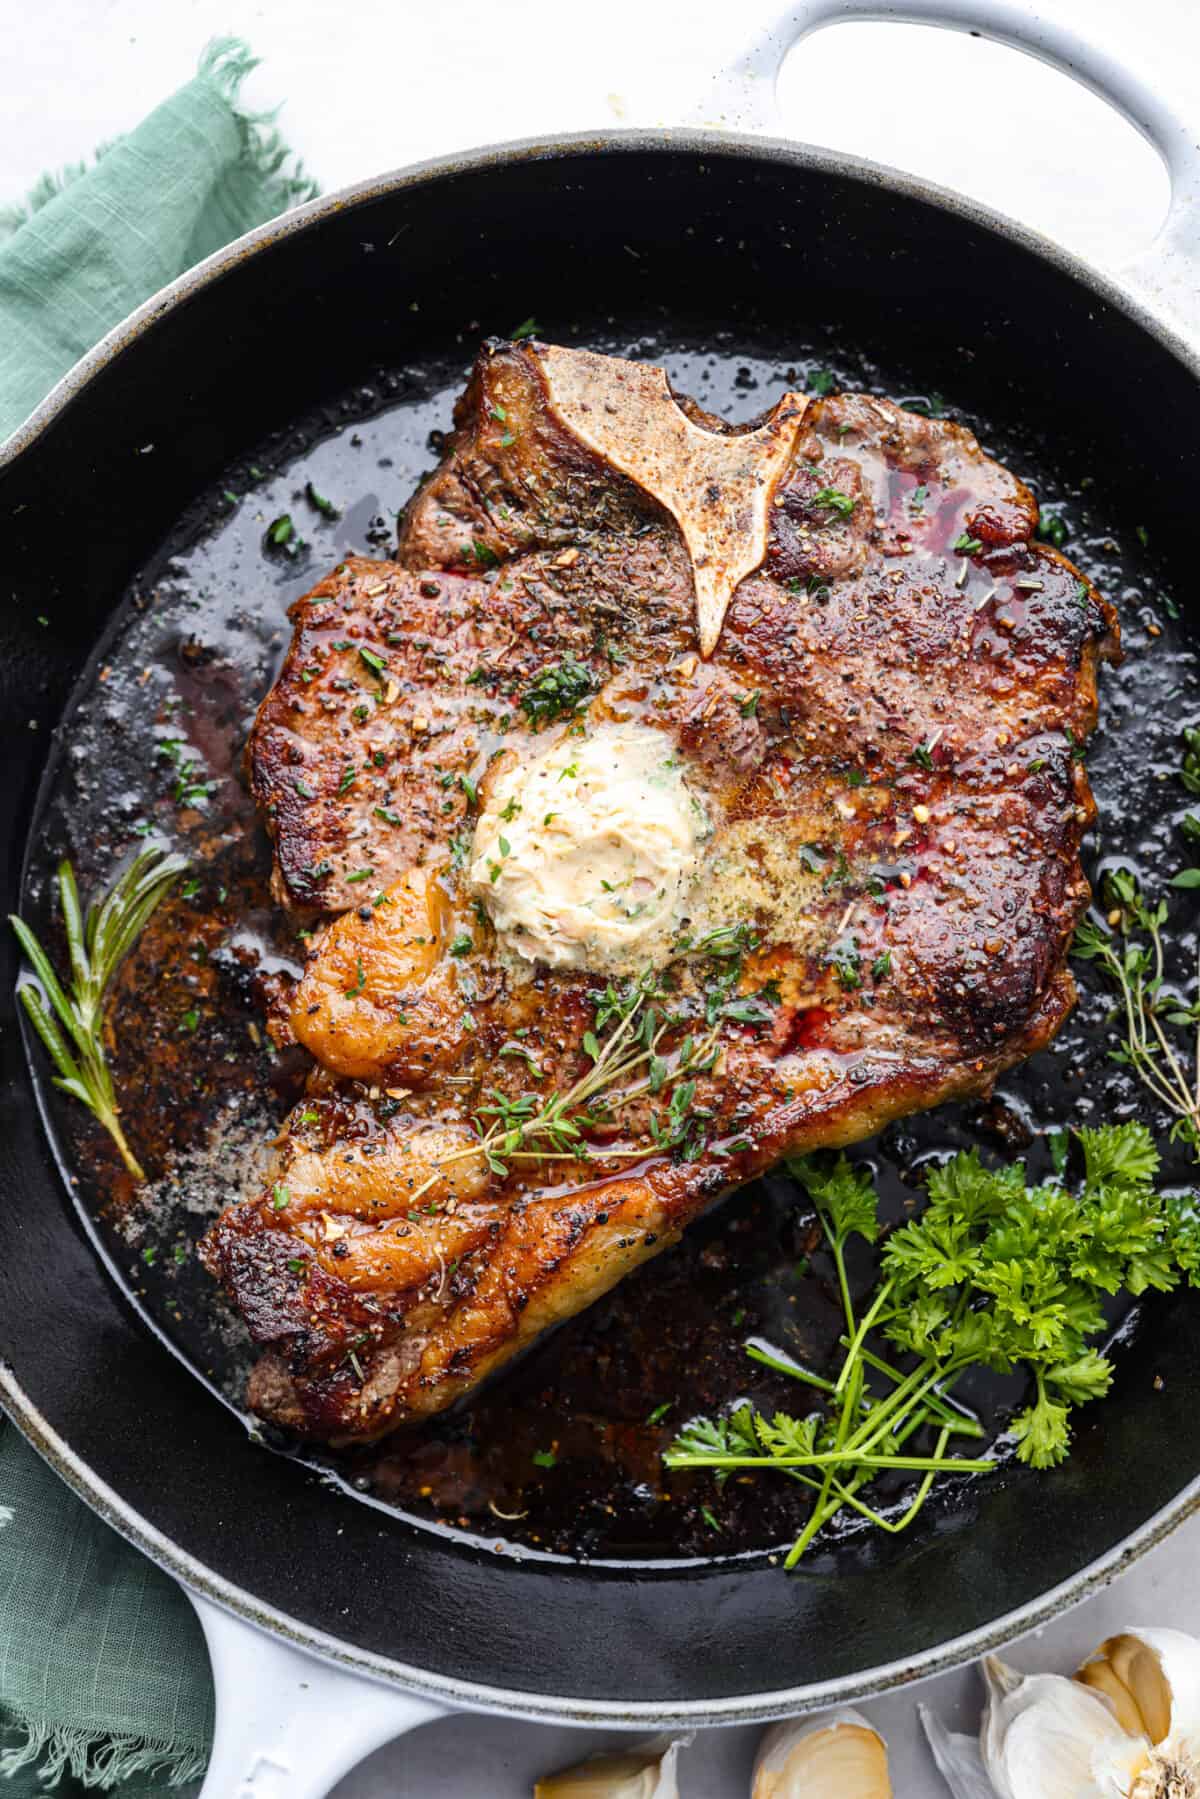 A cooked t-bone steak, topped with herbs and butter in a skillet.